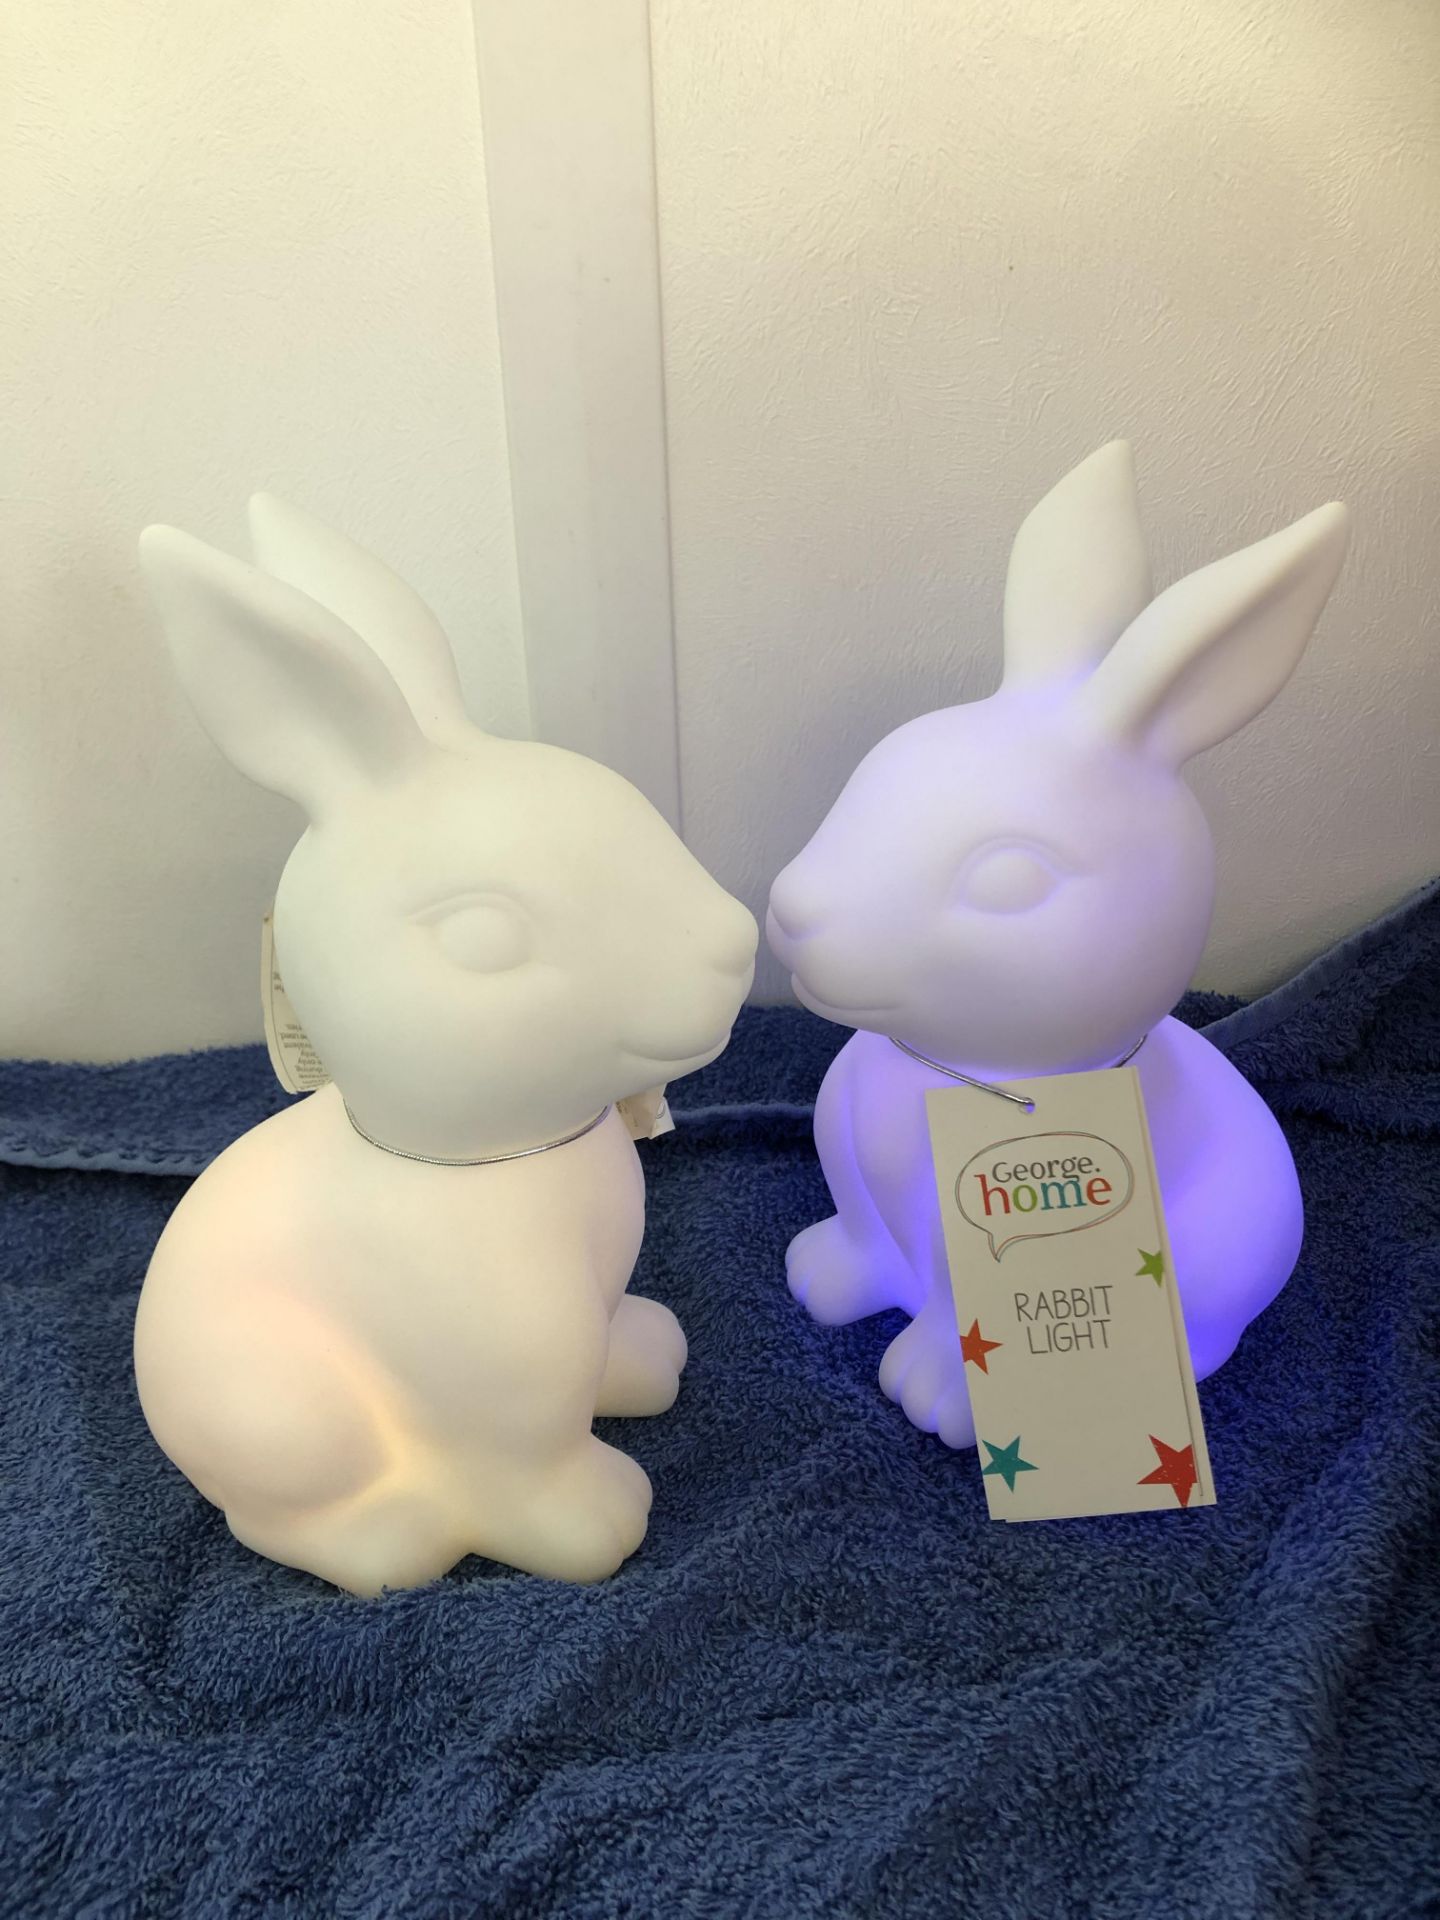 6 BOXES X 2 RABBIT LIGHTS COLOUR CHANGING BATTERY OPERATED (TOTAL QUANTITY 12) - Image 3 of 3